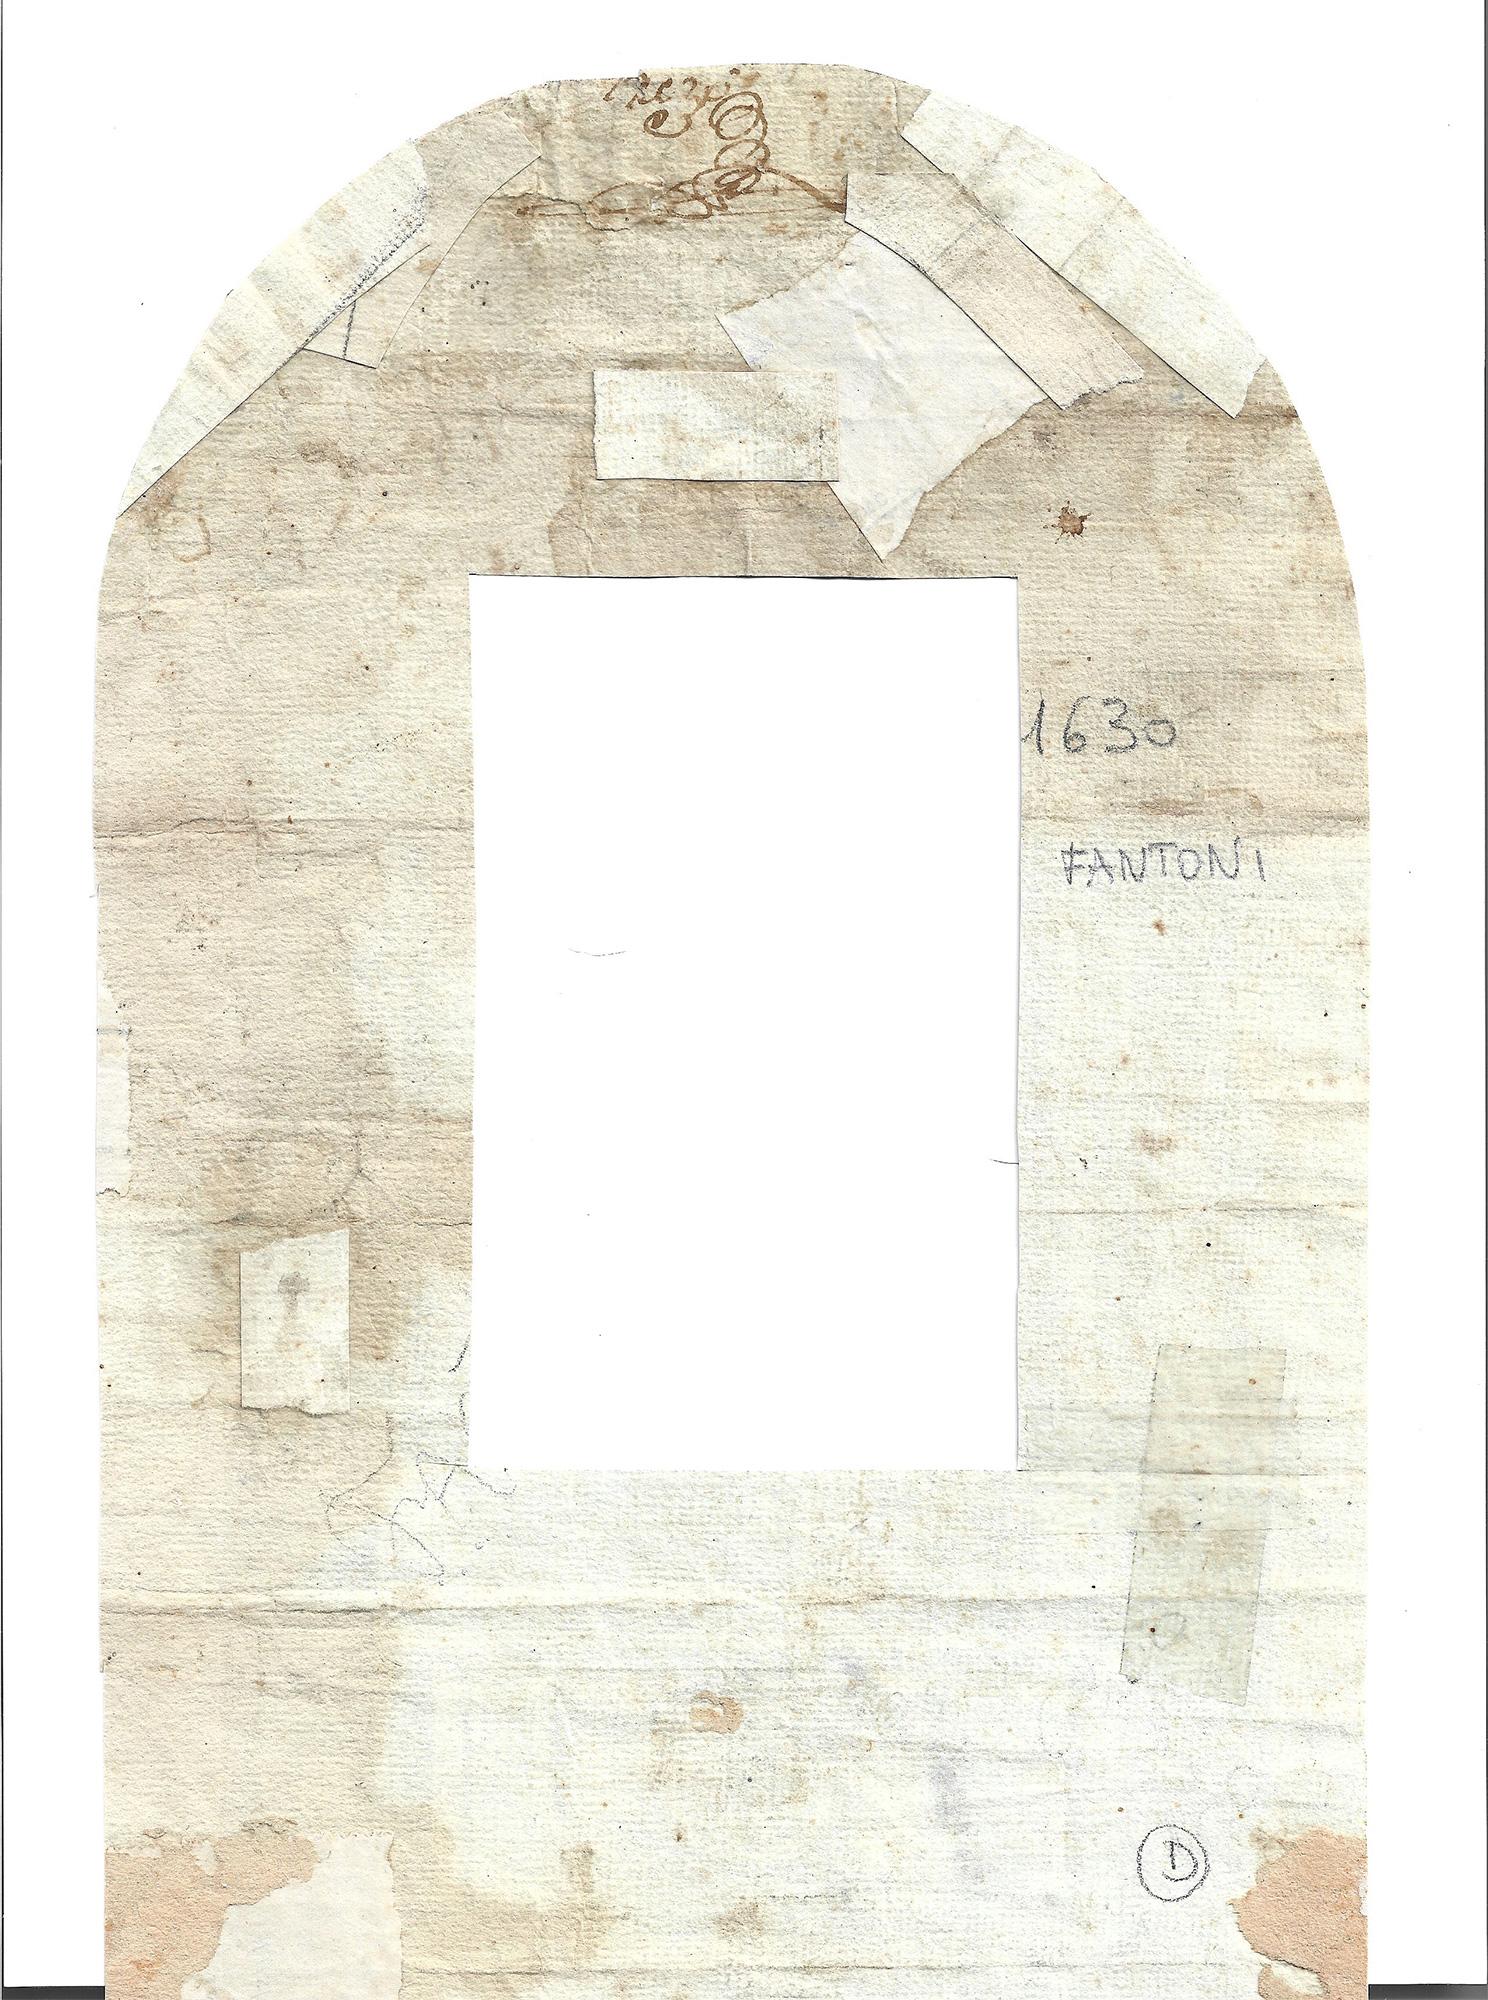 Design for a large wooden confessional from the Santoni Workshop - Art by Unknown